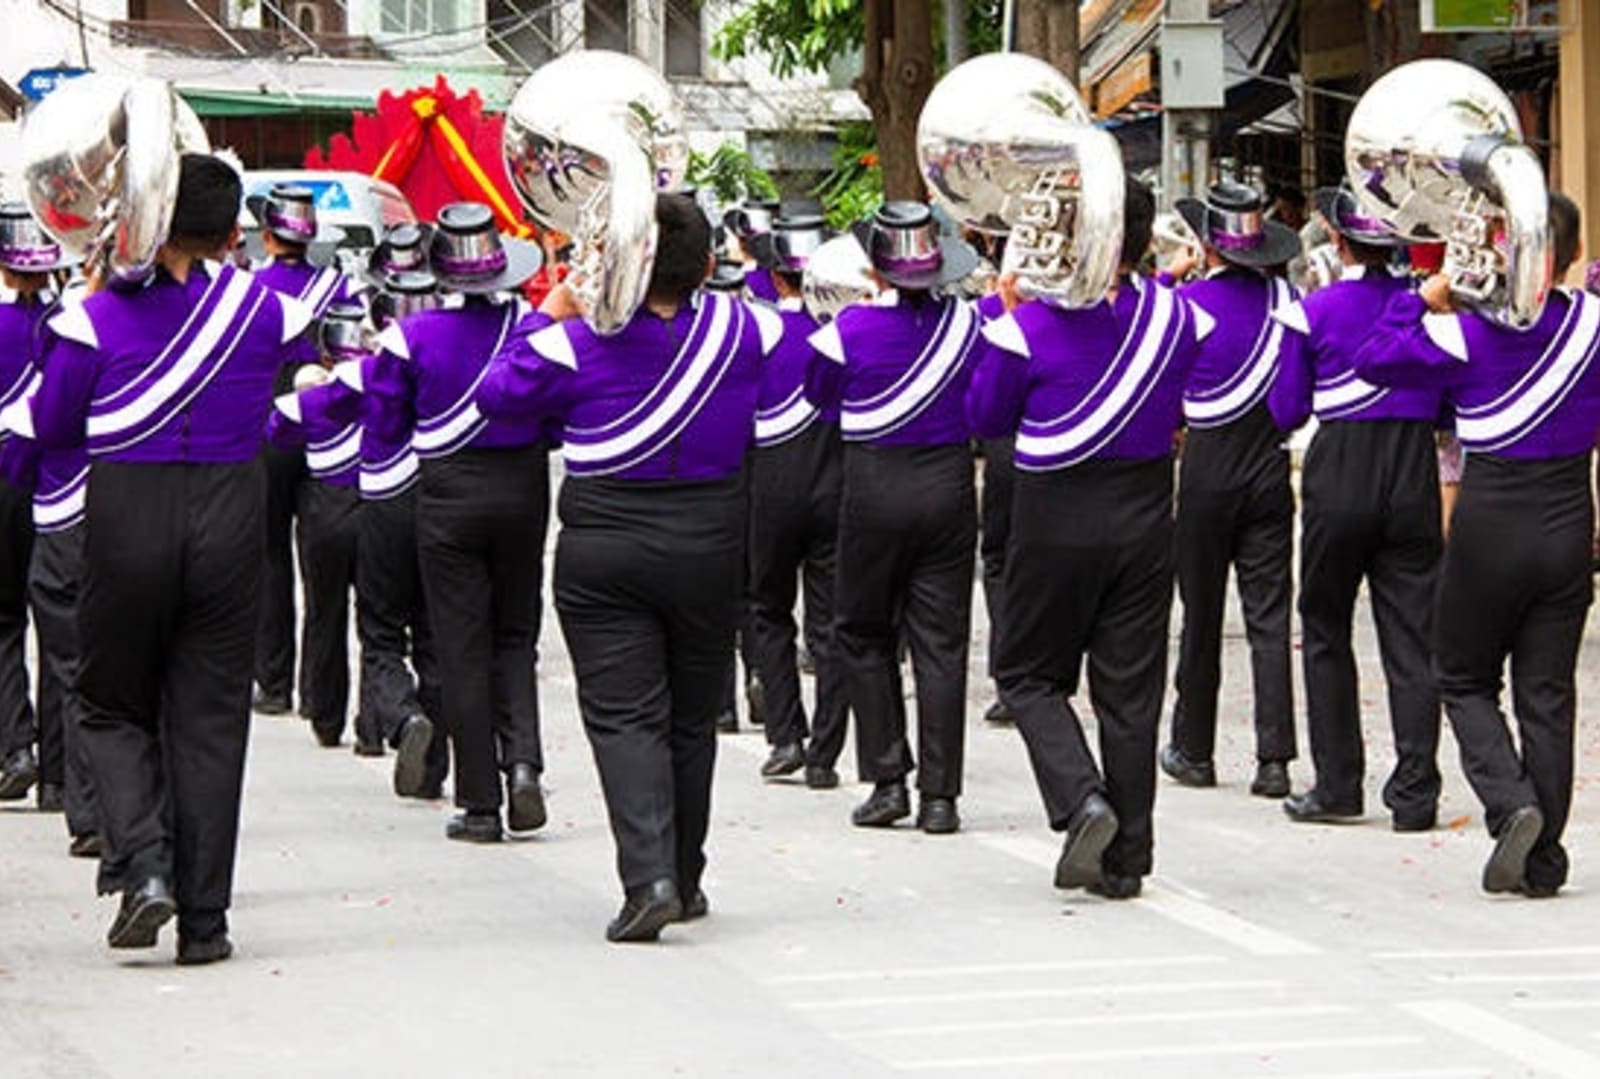 rs-marching-band-nyc-shutterstock152682530.jpeg